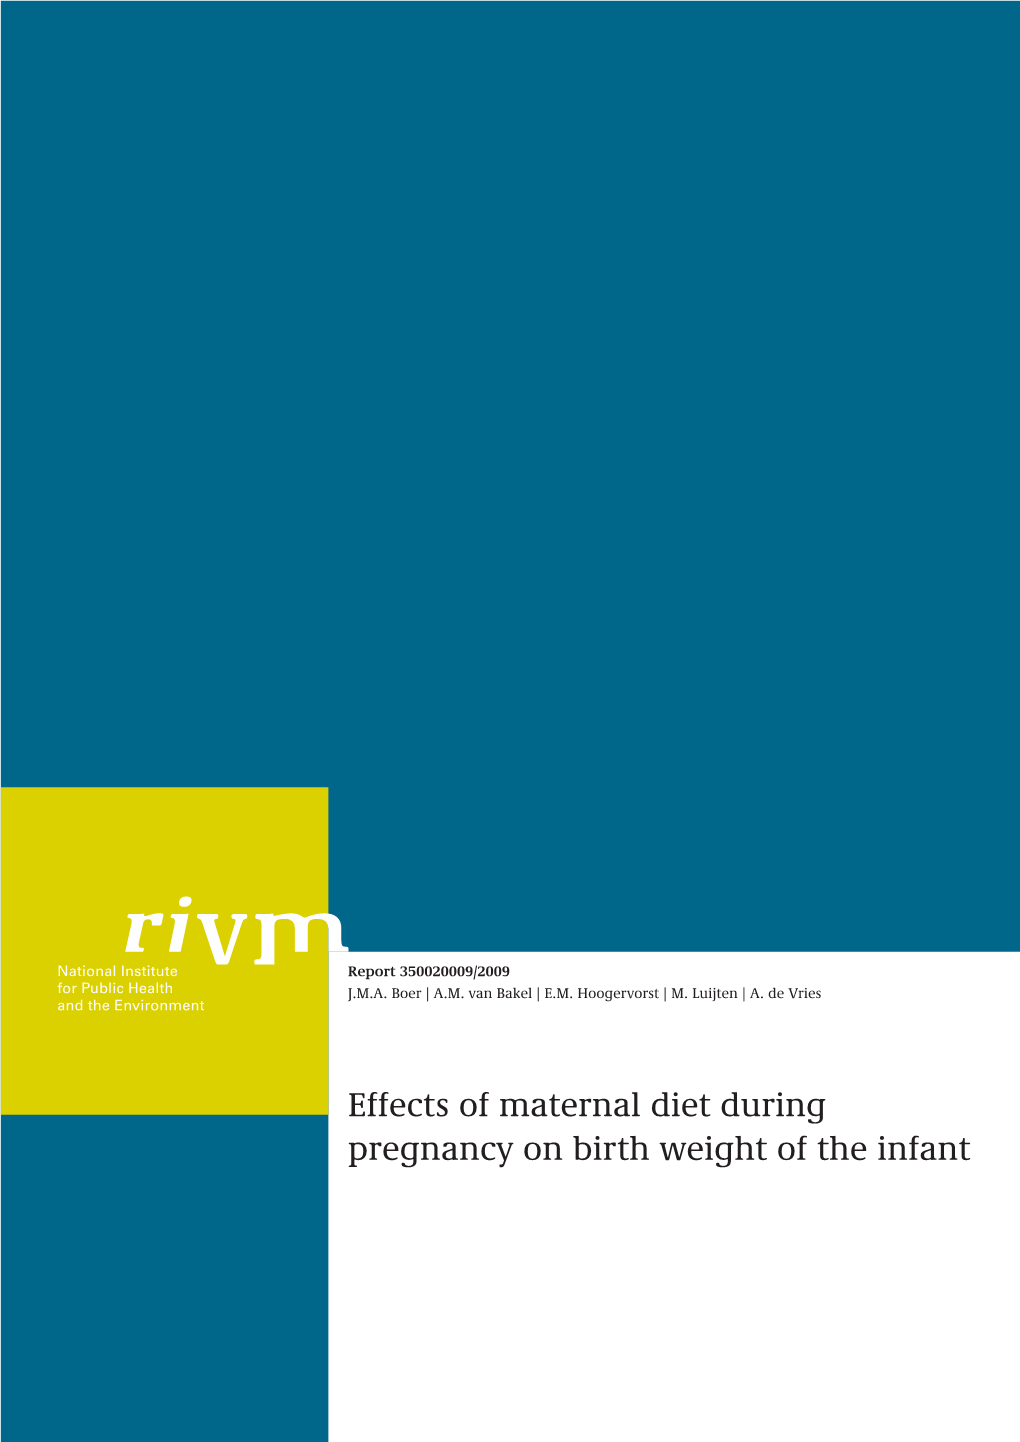 RIVM Report 350020009 Effects of Maternal Diet During Pregnancy on Birth Weight of the Infant